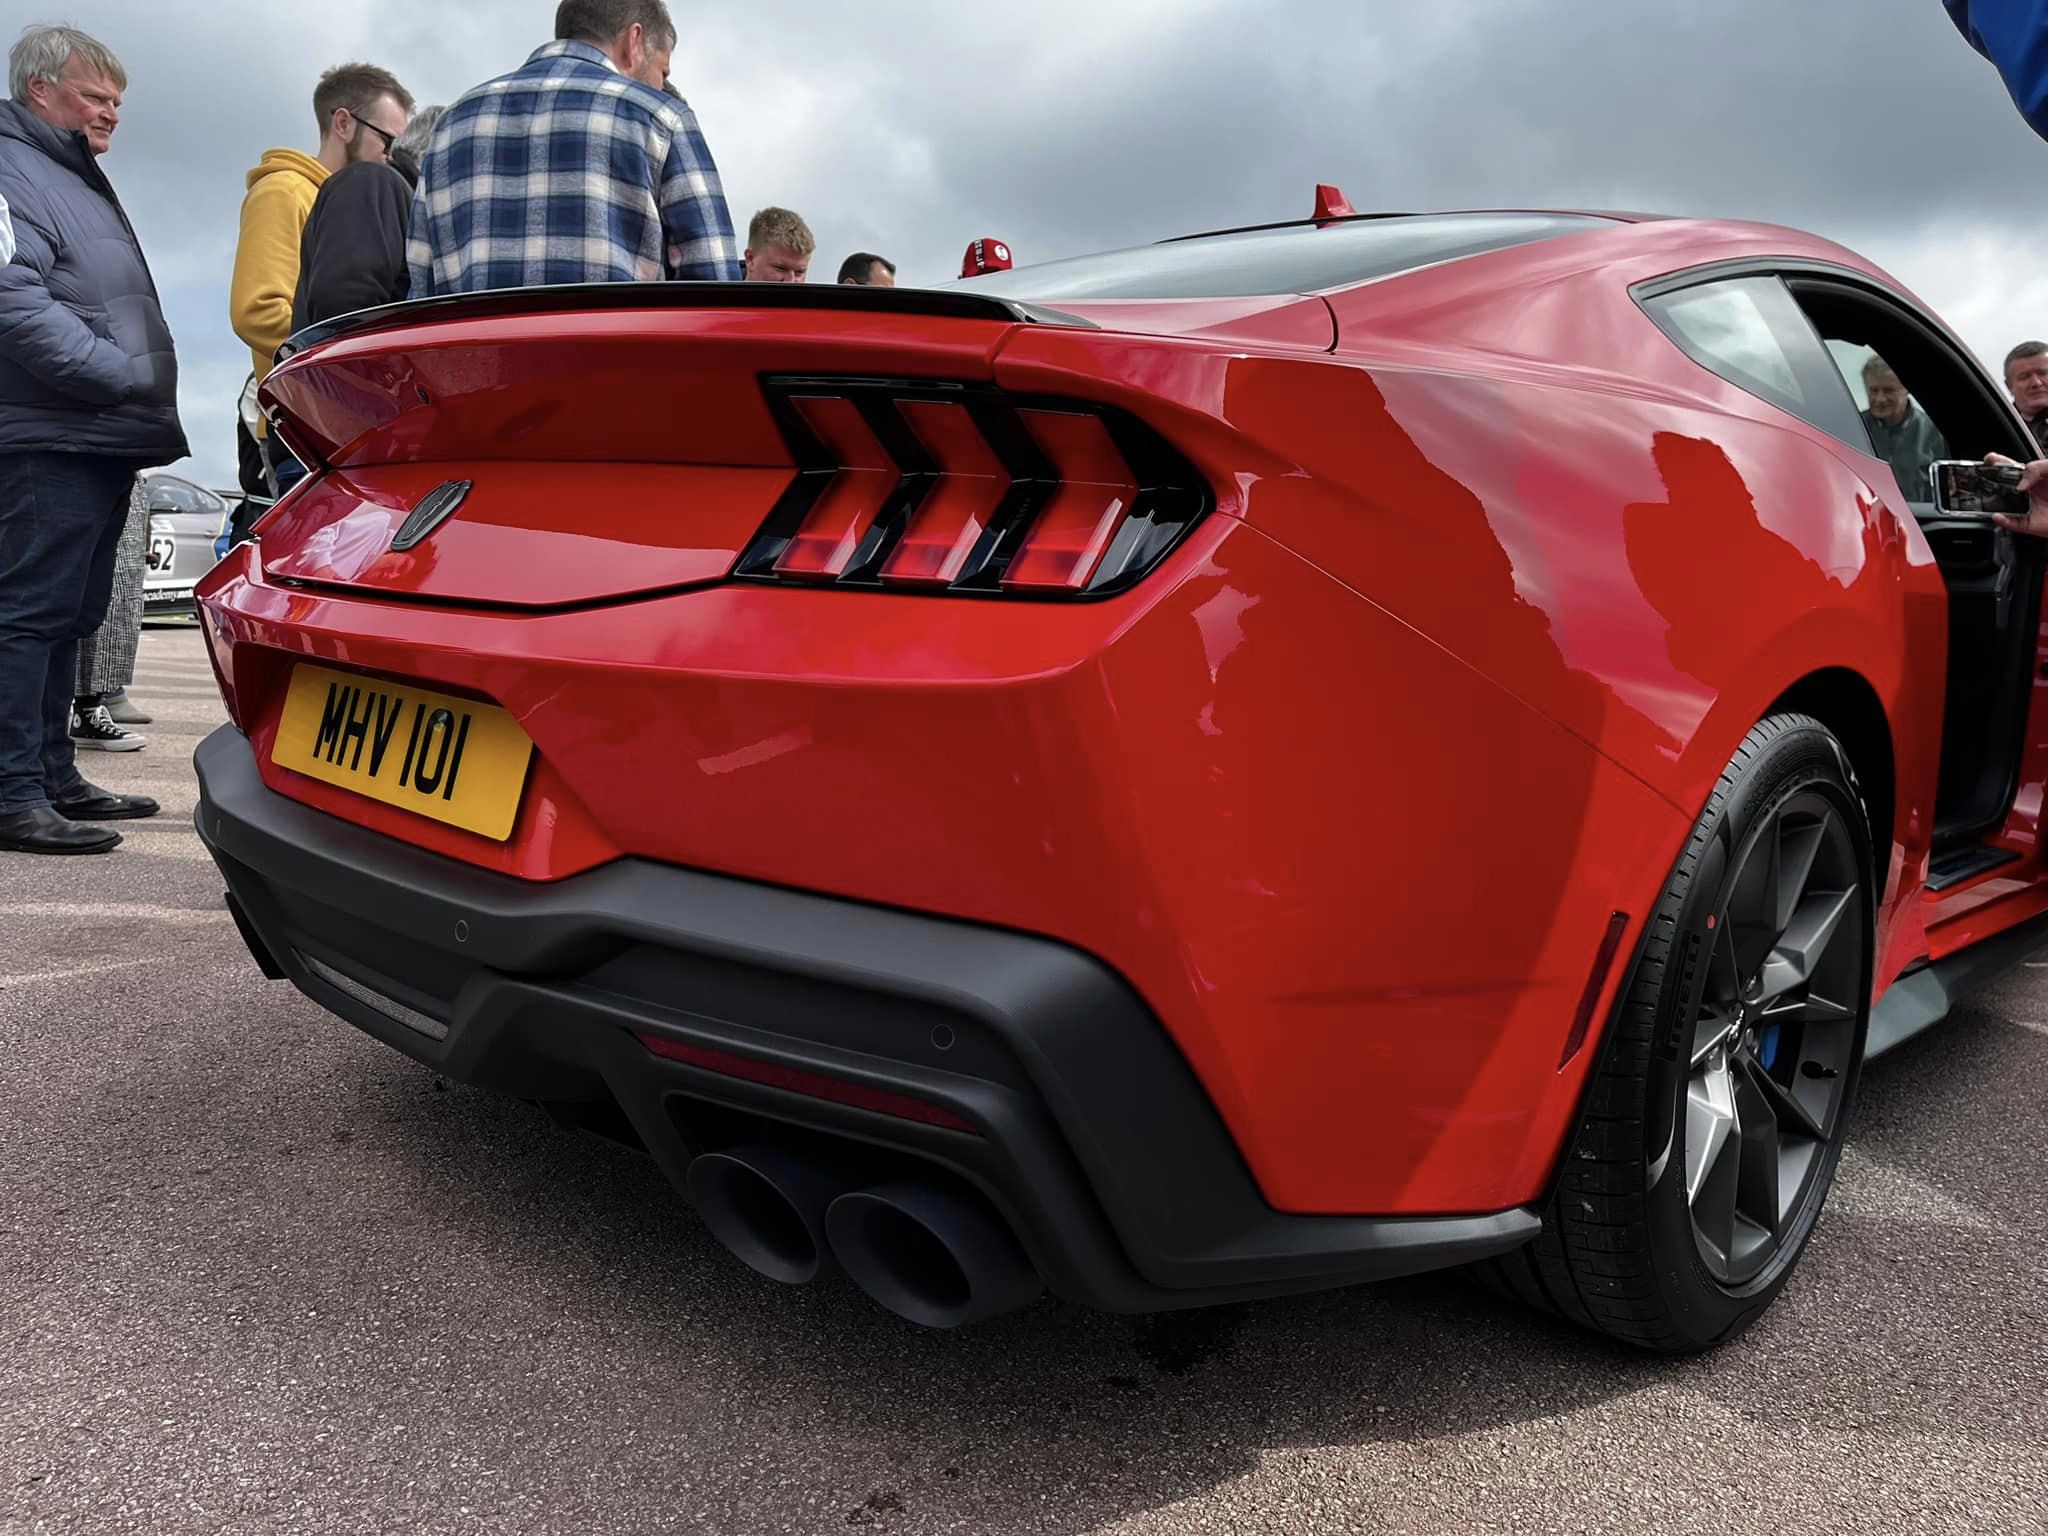 S650 Mustang UK reveal of the S650: Race Red Dark Horse Mustang DH 16